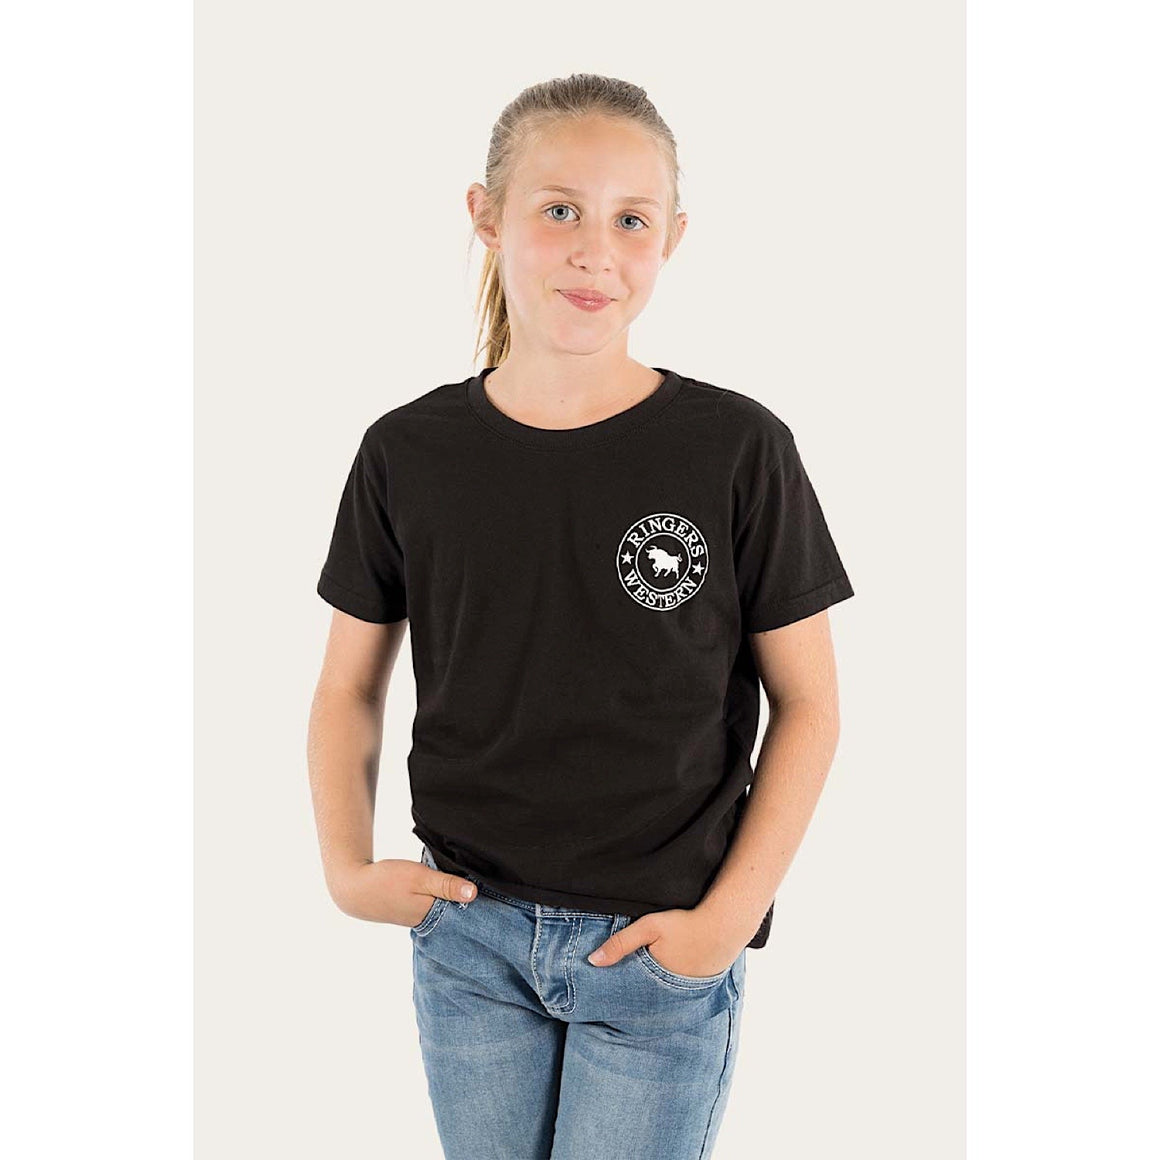 Ringers Western Kids Signature Bull Classic Fit T-Shirt - Black With White Print